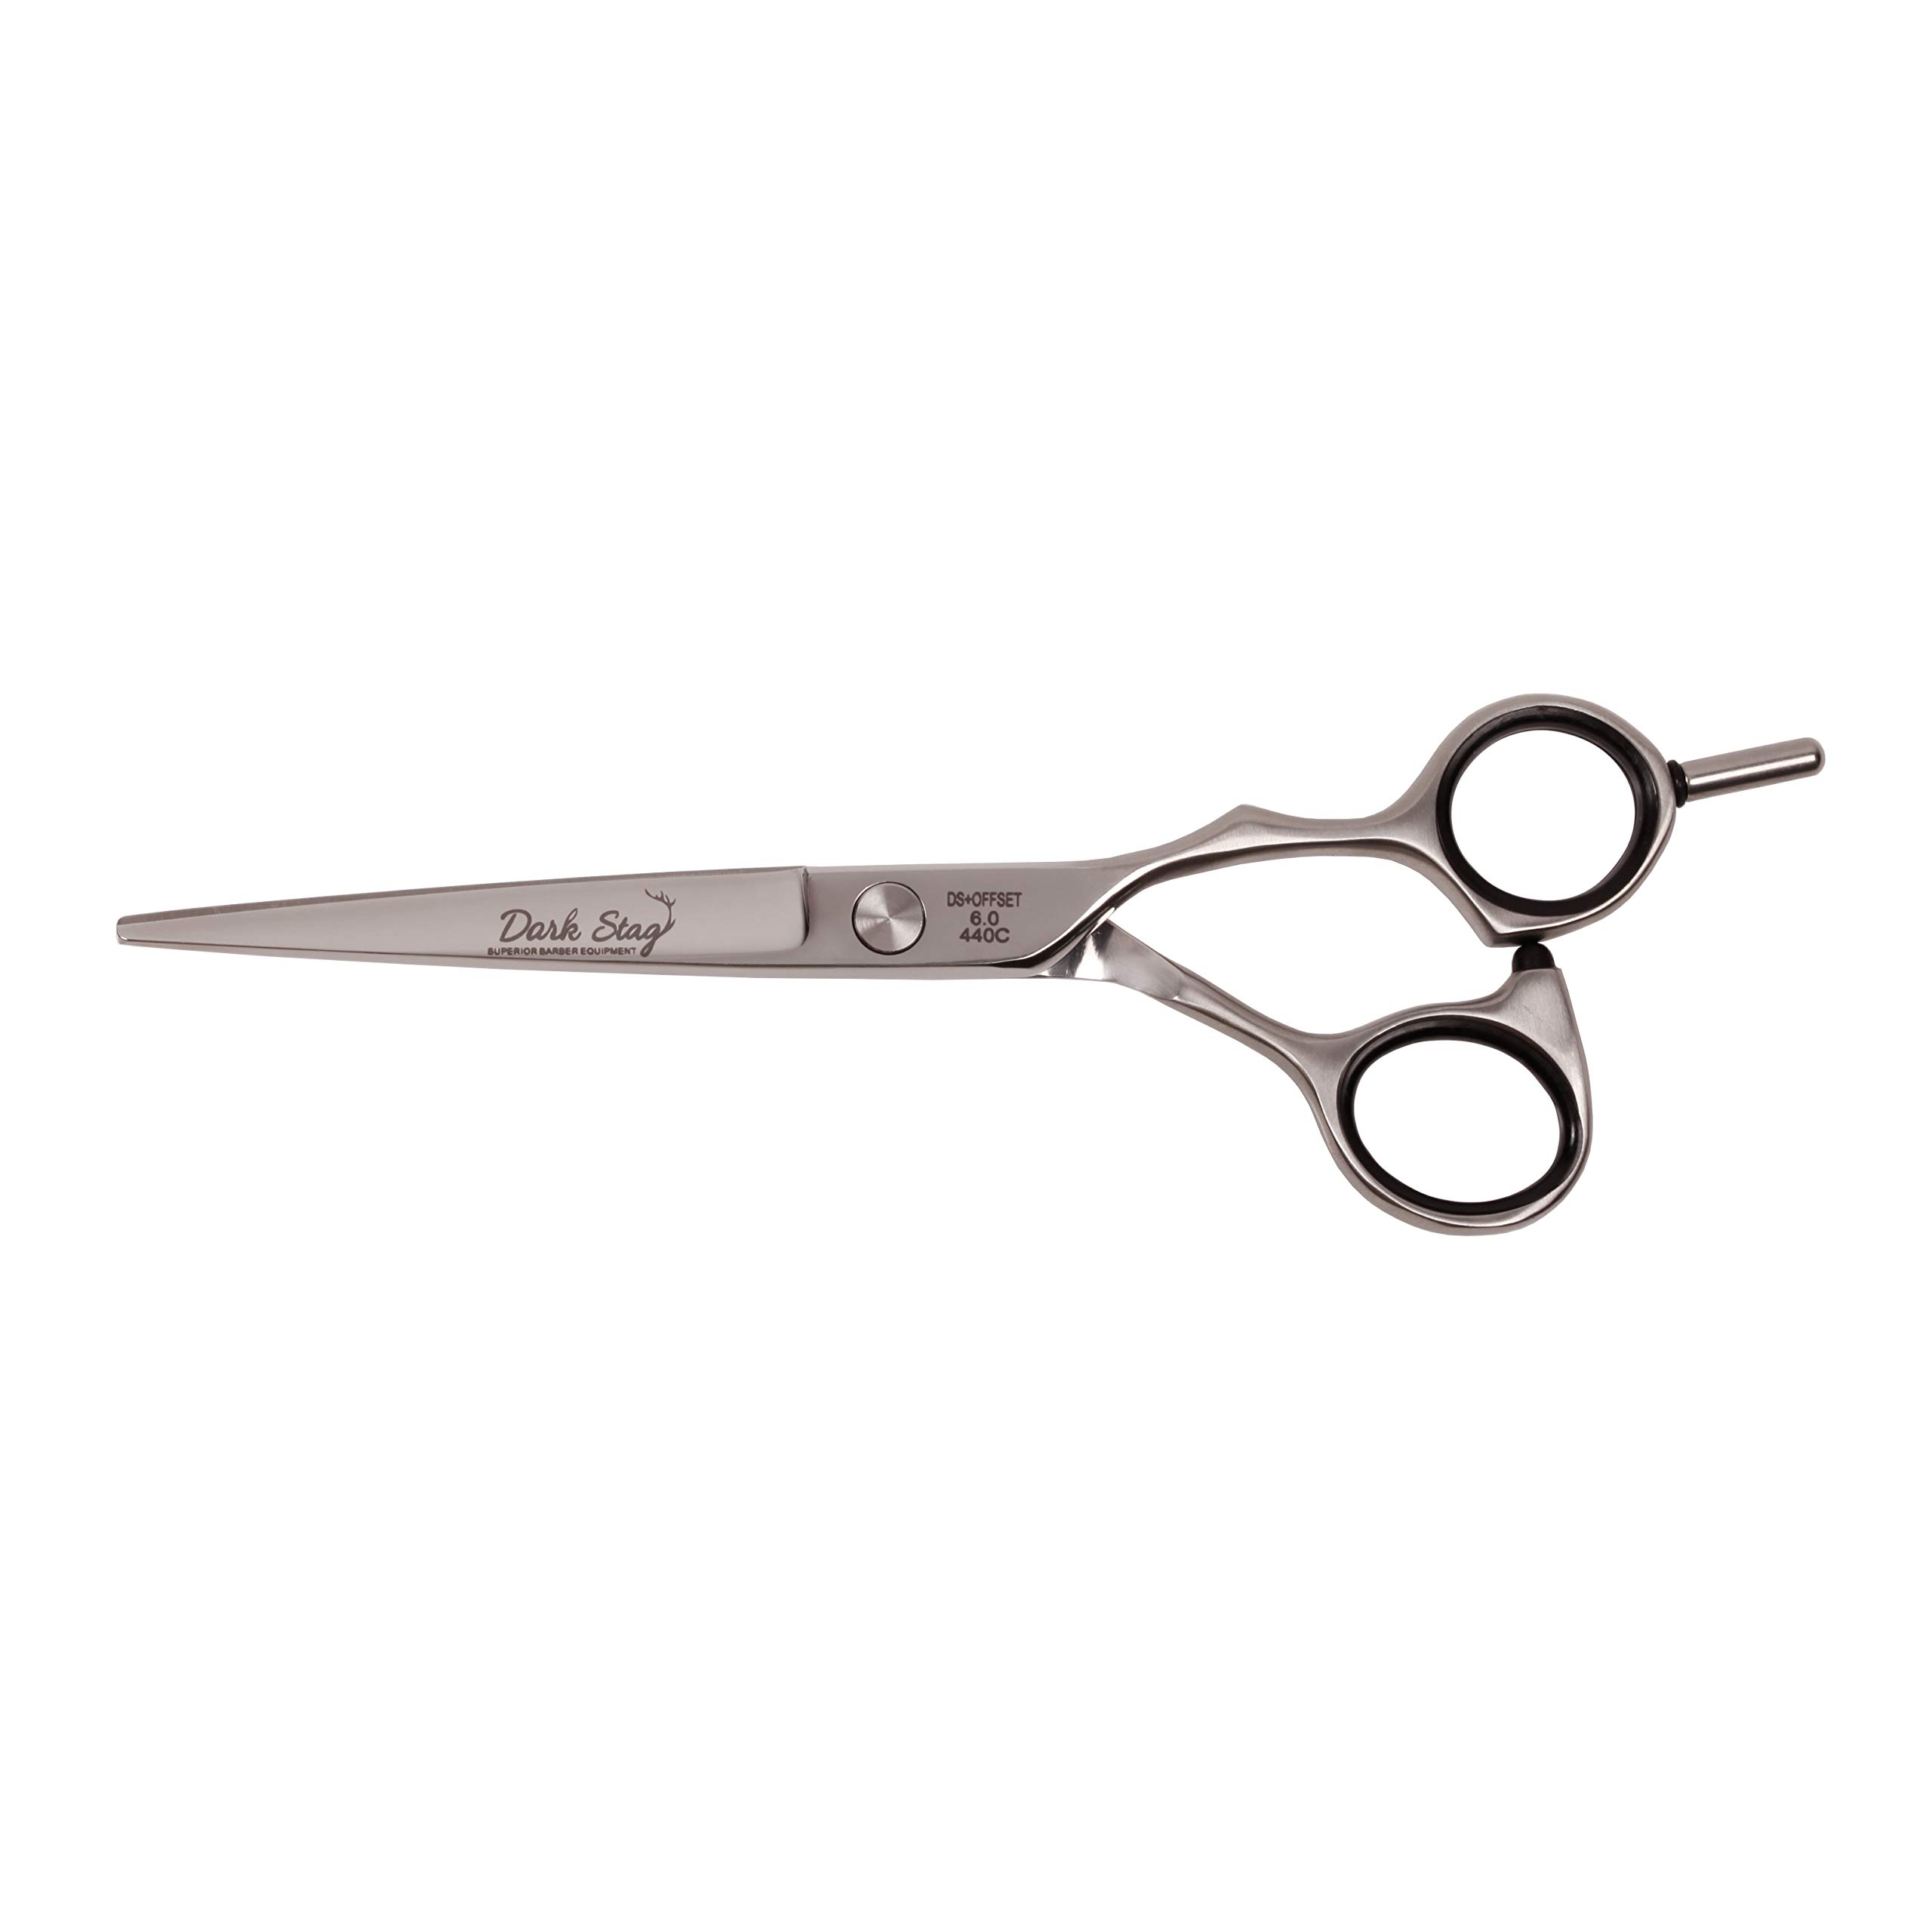 Dark Stag DS+ Offset convex razor edge professional barber scissor for professional hairdressers barbers. Stainless steel hair cutting shears. For salon barbers. - 7 inch